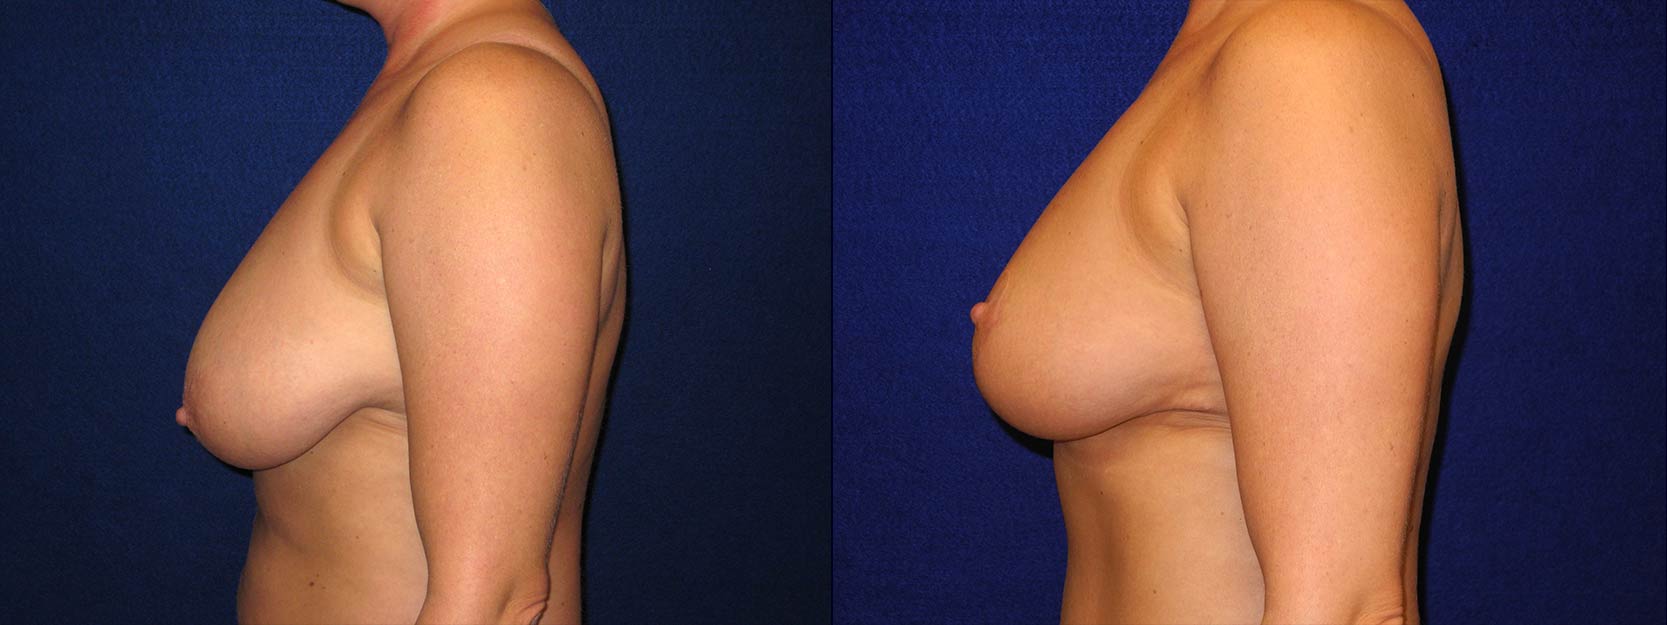 Left Profile View - Breast Reduction